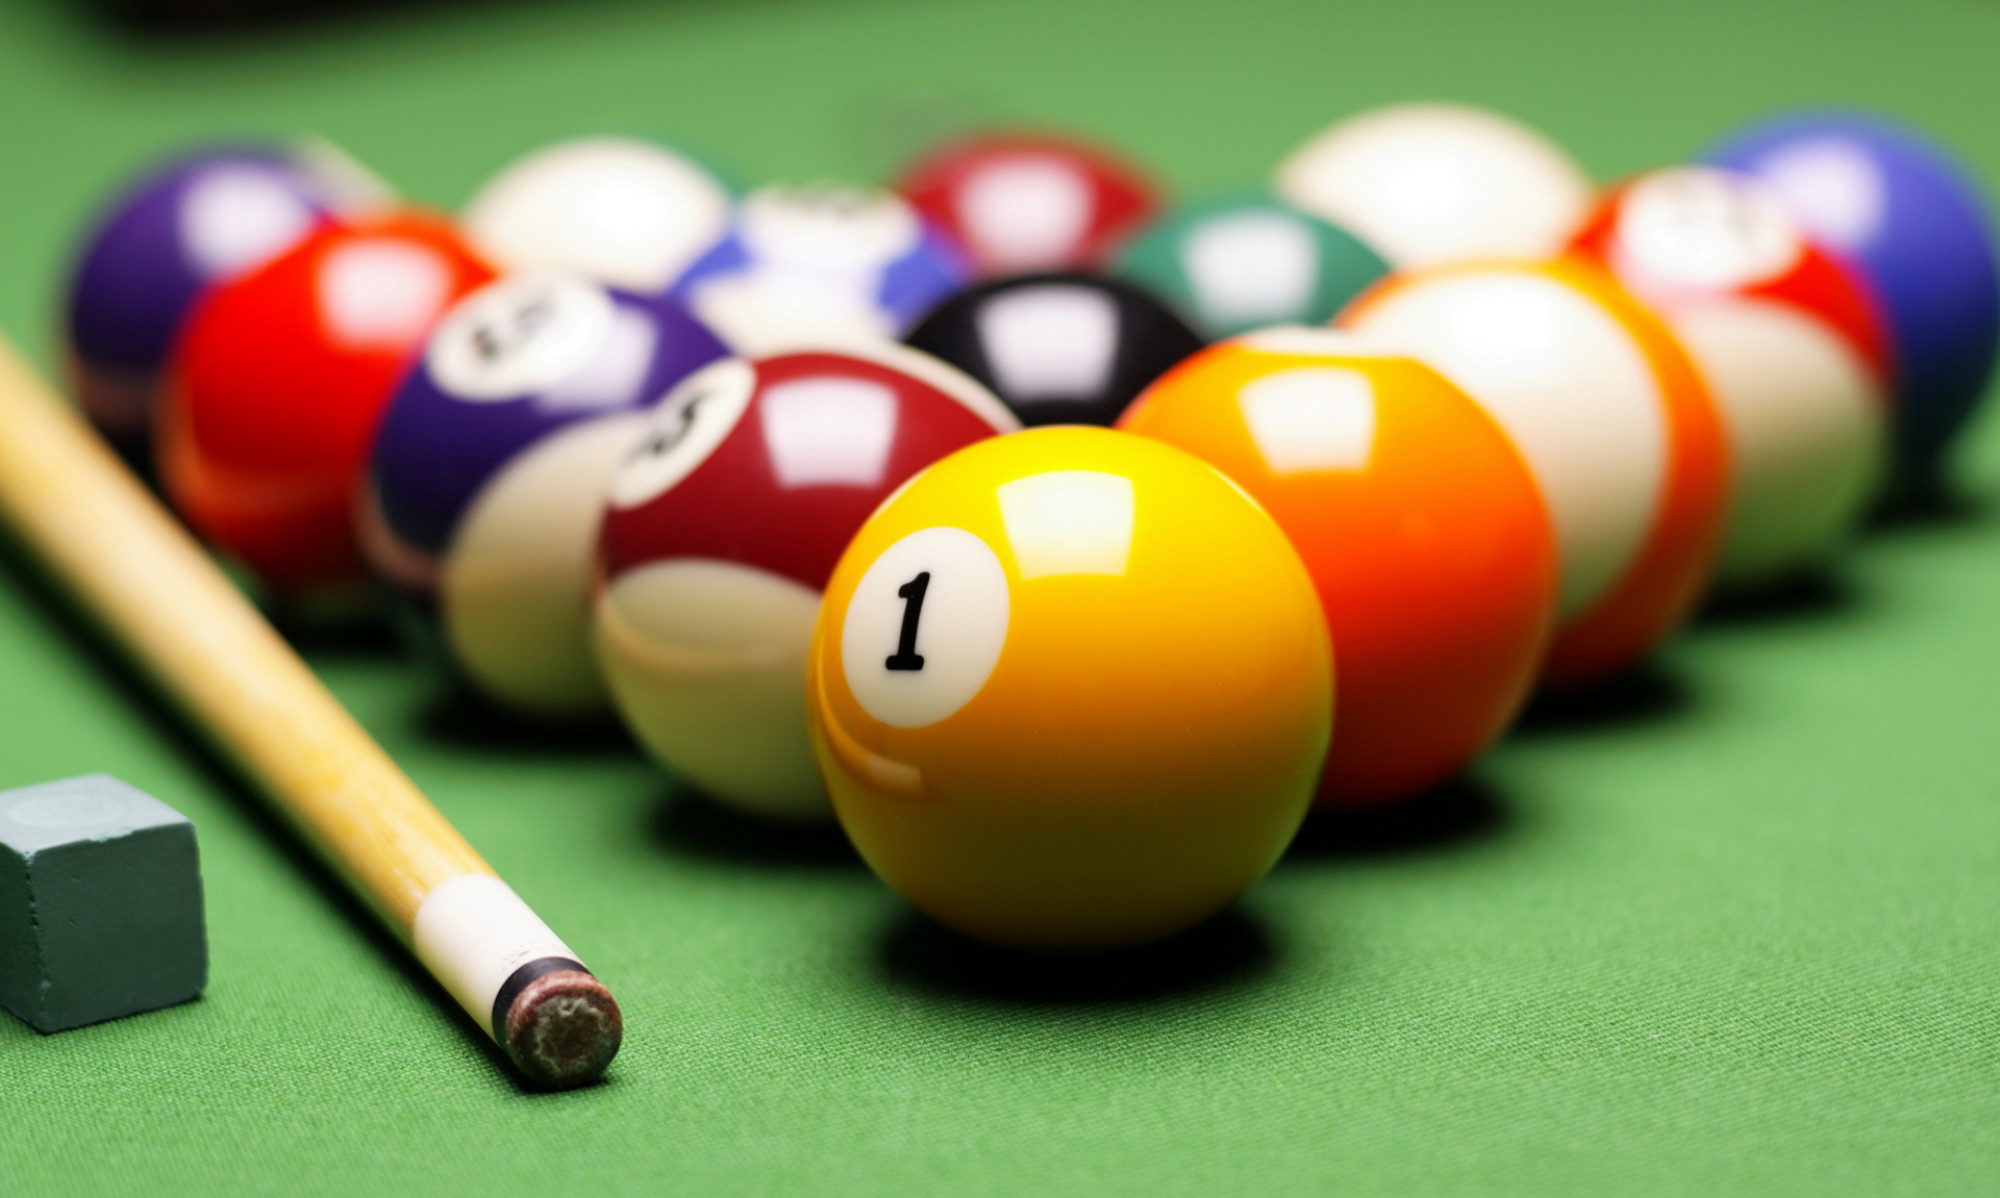 Player's Place – Billiards and Sports Bar